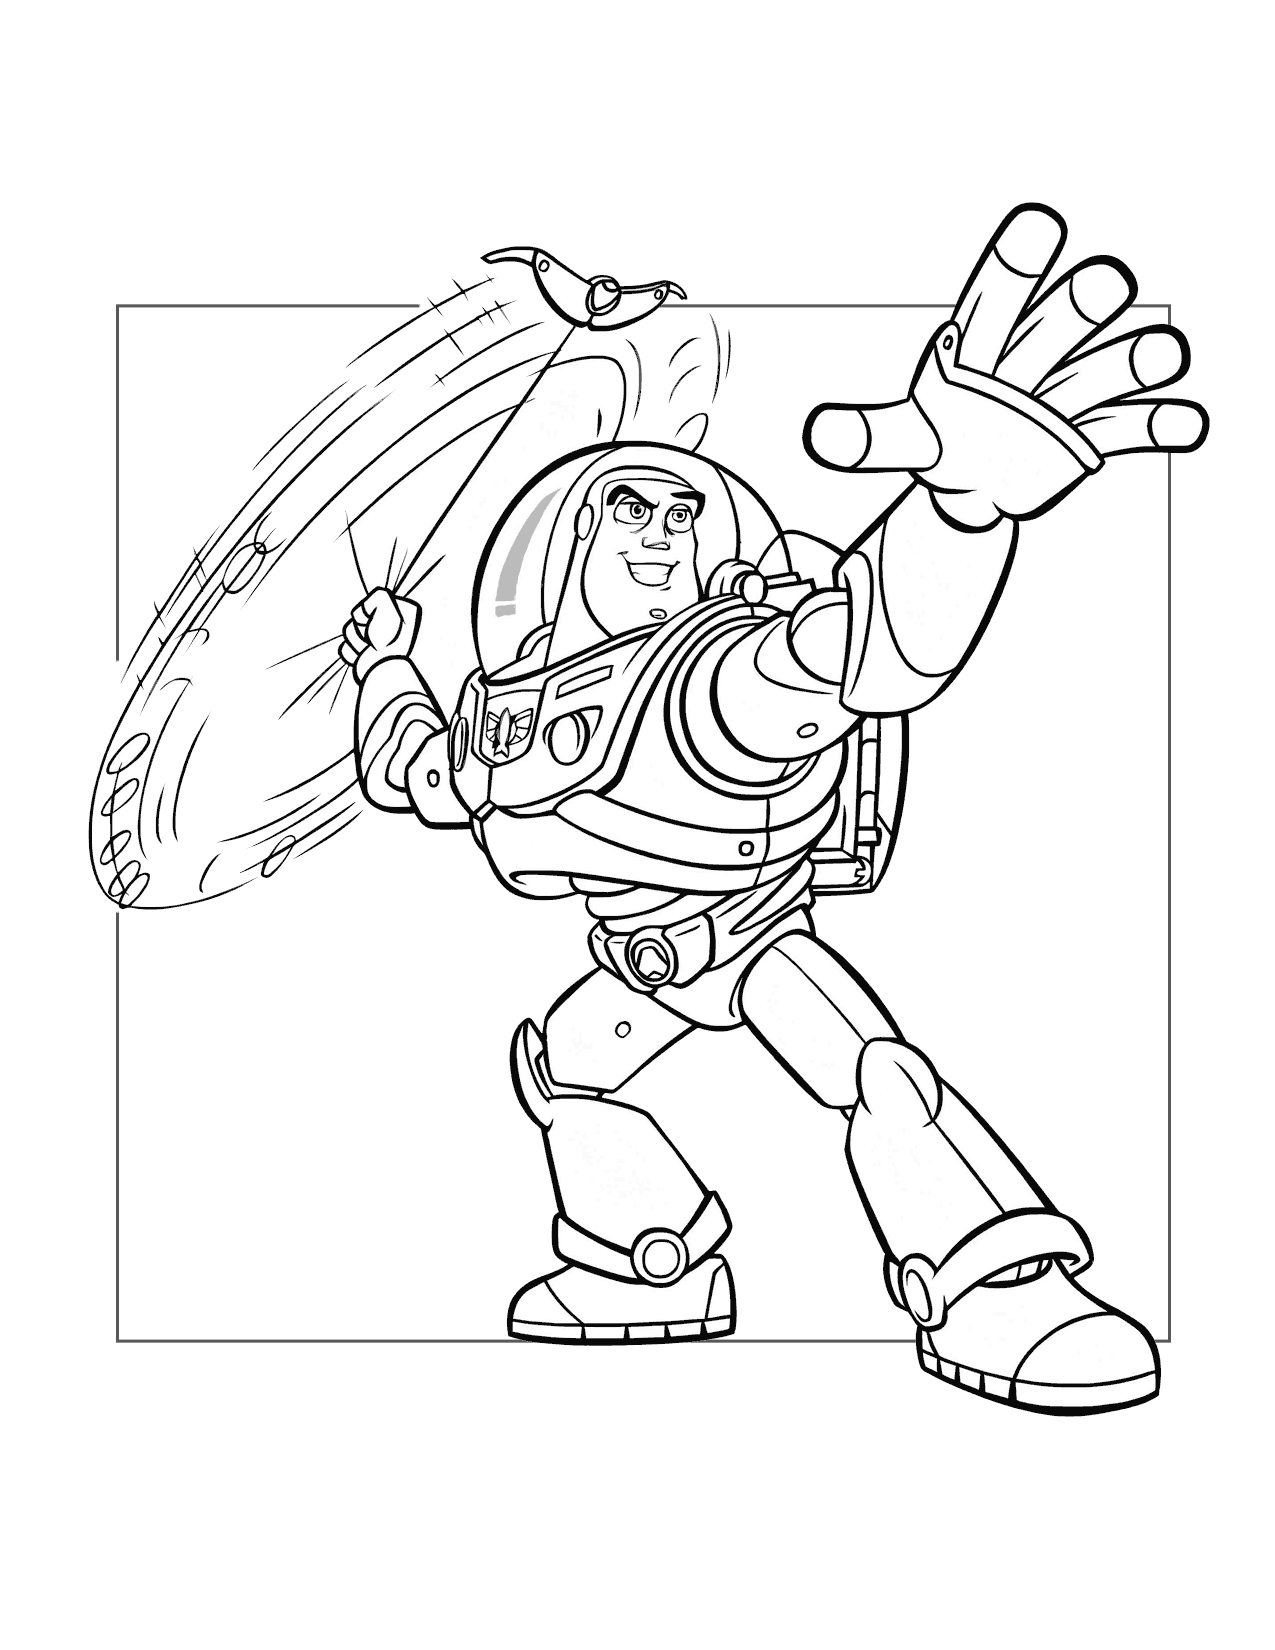 Buzz Lightyear Throws A Grappling Hook Coloring Page